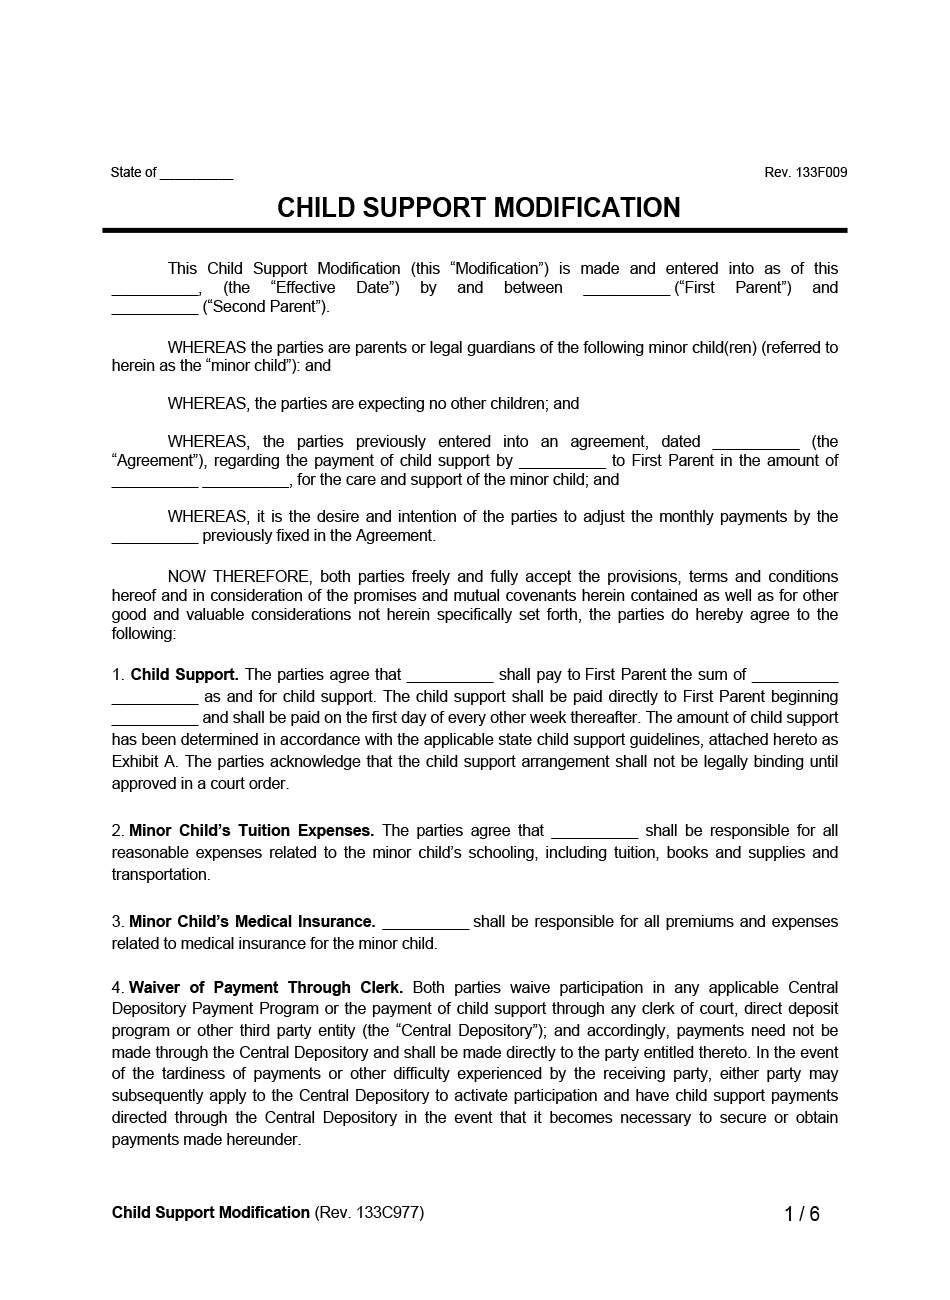 Child Support Modification Example Form